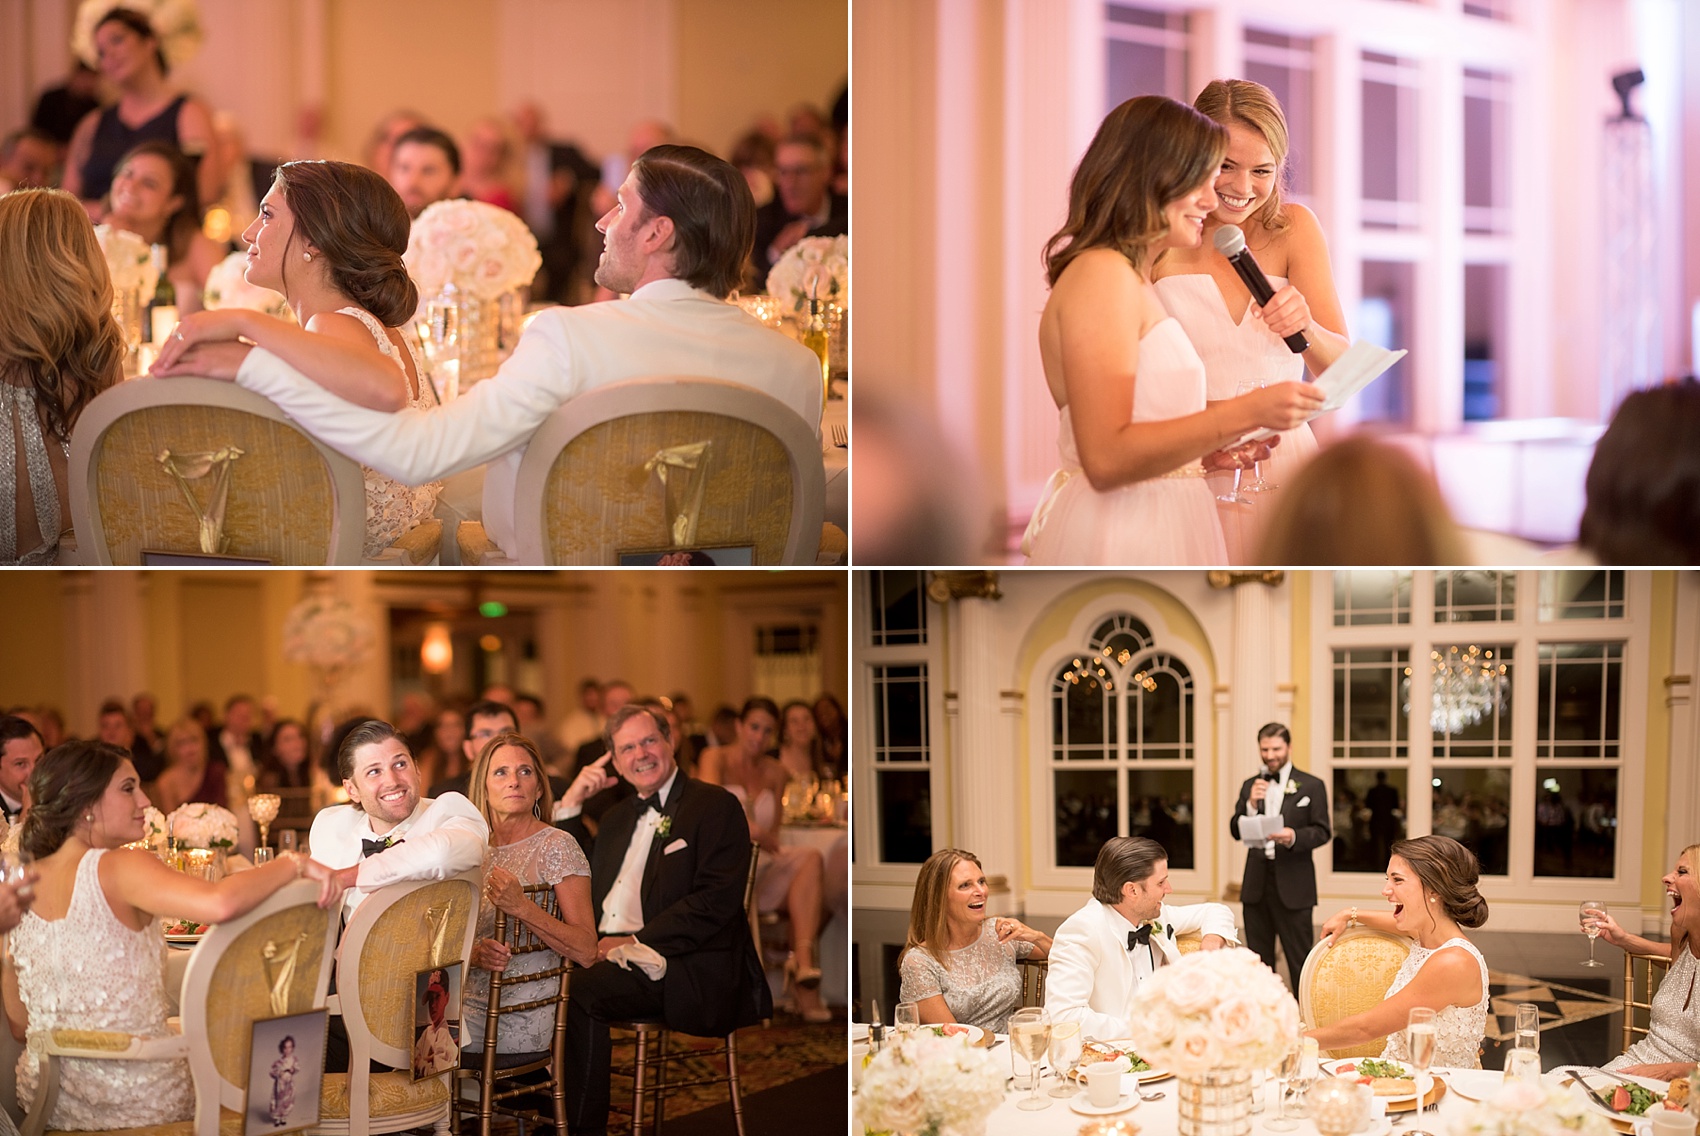 Wedding at The Riverview, Connecticut. Images by NYC wedding photographer Mikkel Paige Photography. Flowers by Diane Gaudett.